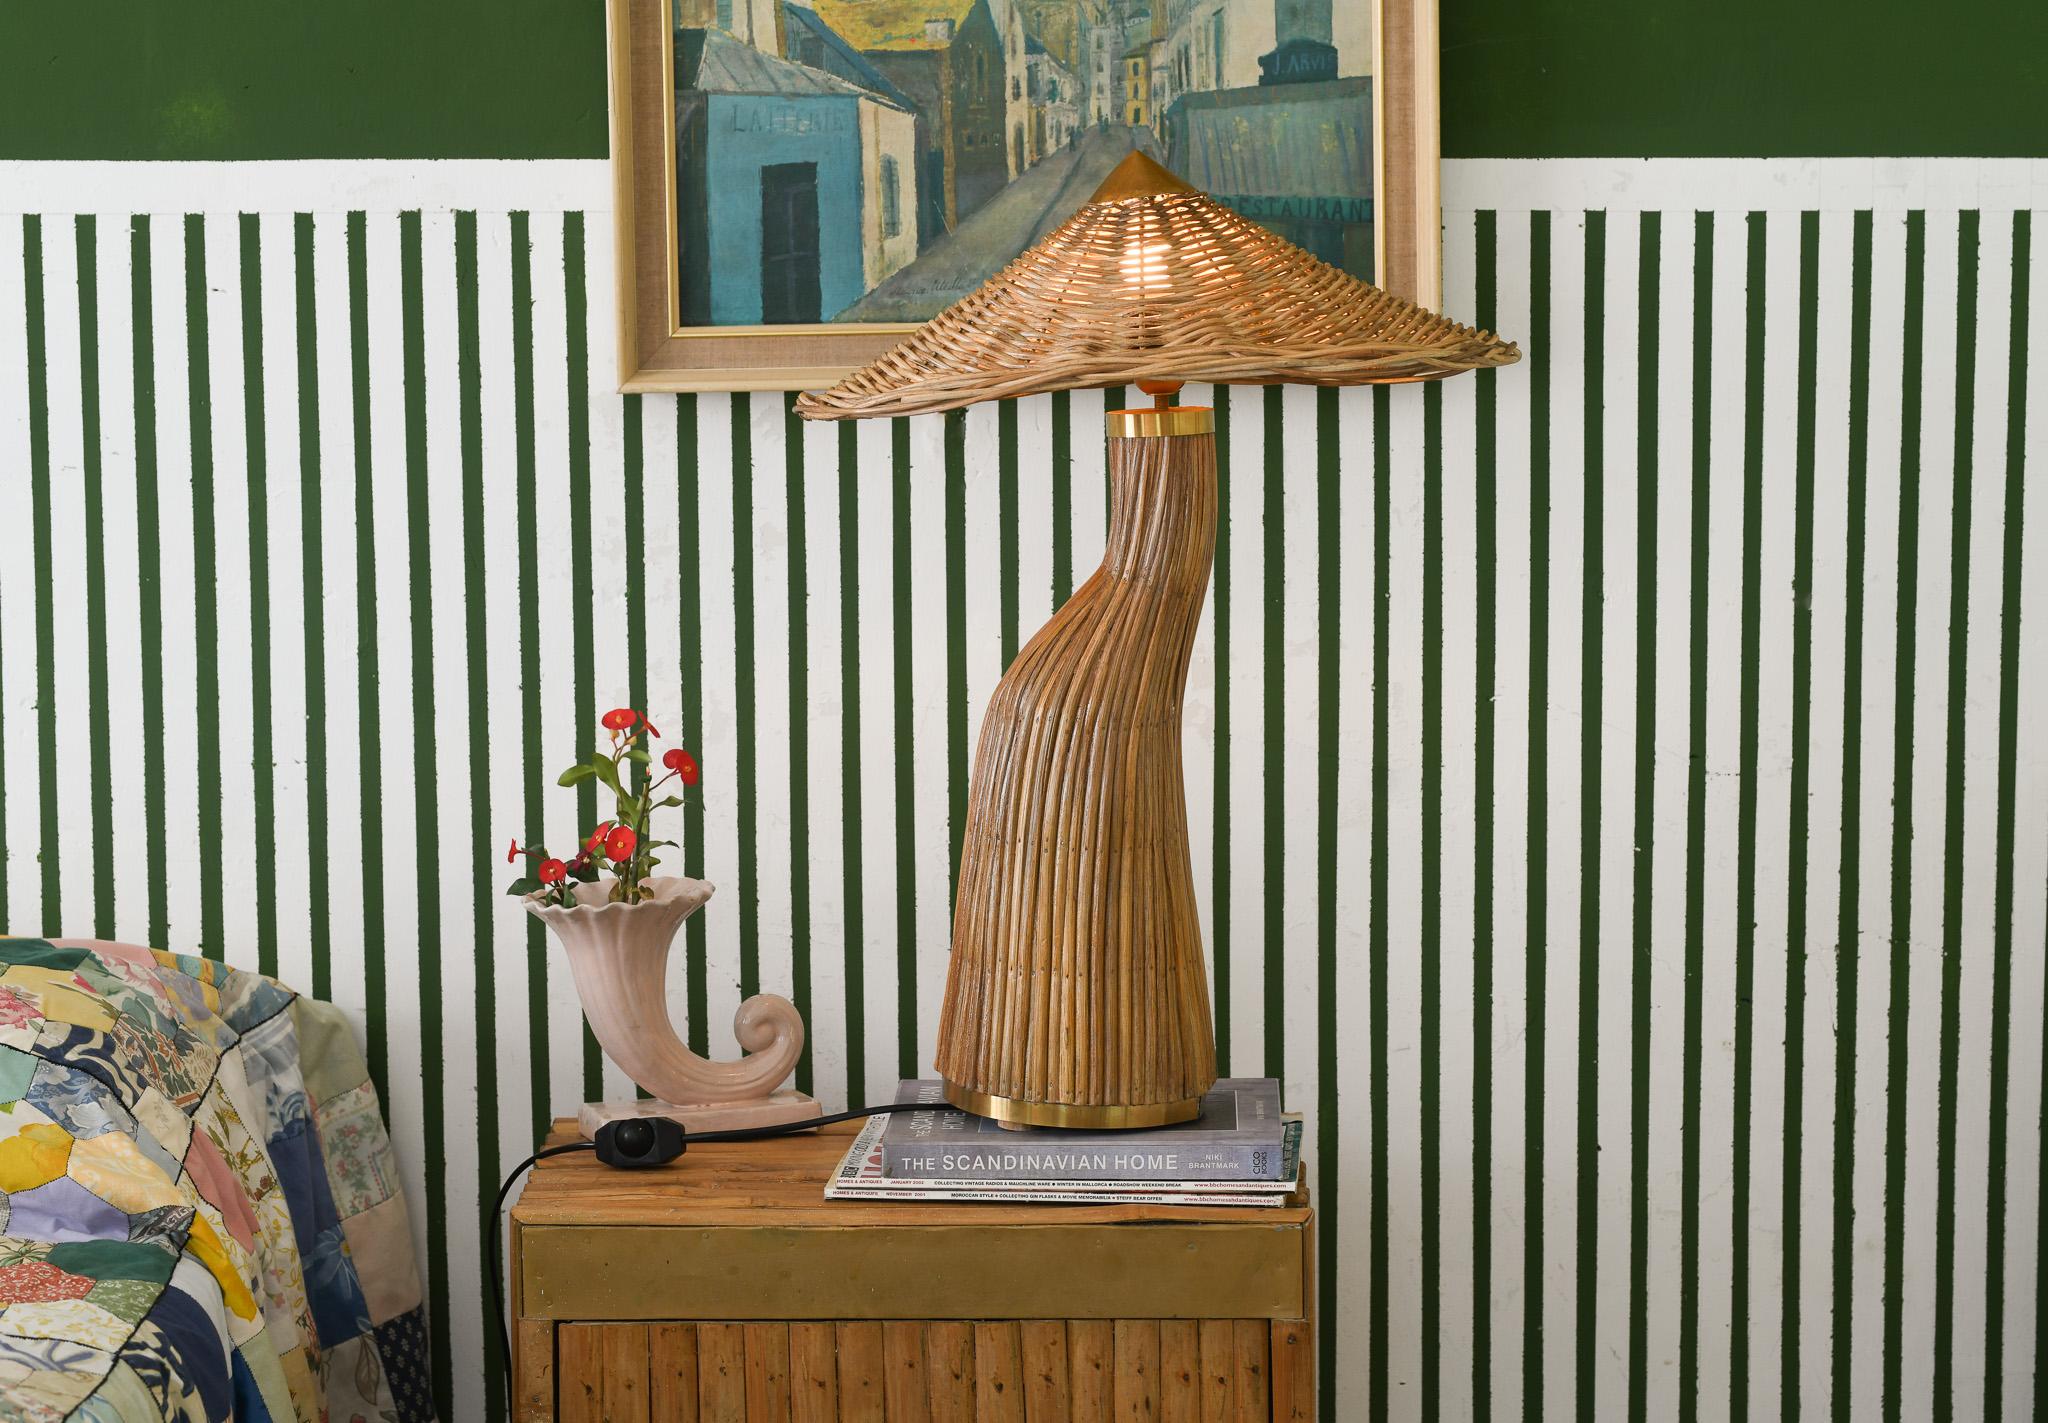 Illuminate your space with elegance and artistry with this mid century modern style pencil reed rattan table lamp. Handcrafted with a beautiful structural shroom shape and accented with gold, it adds amazing texture and warmth to any room. The